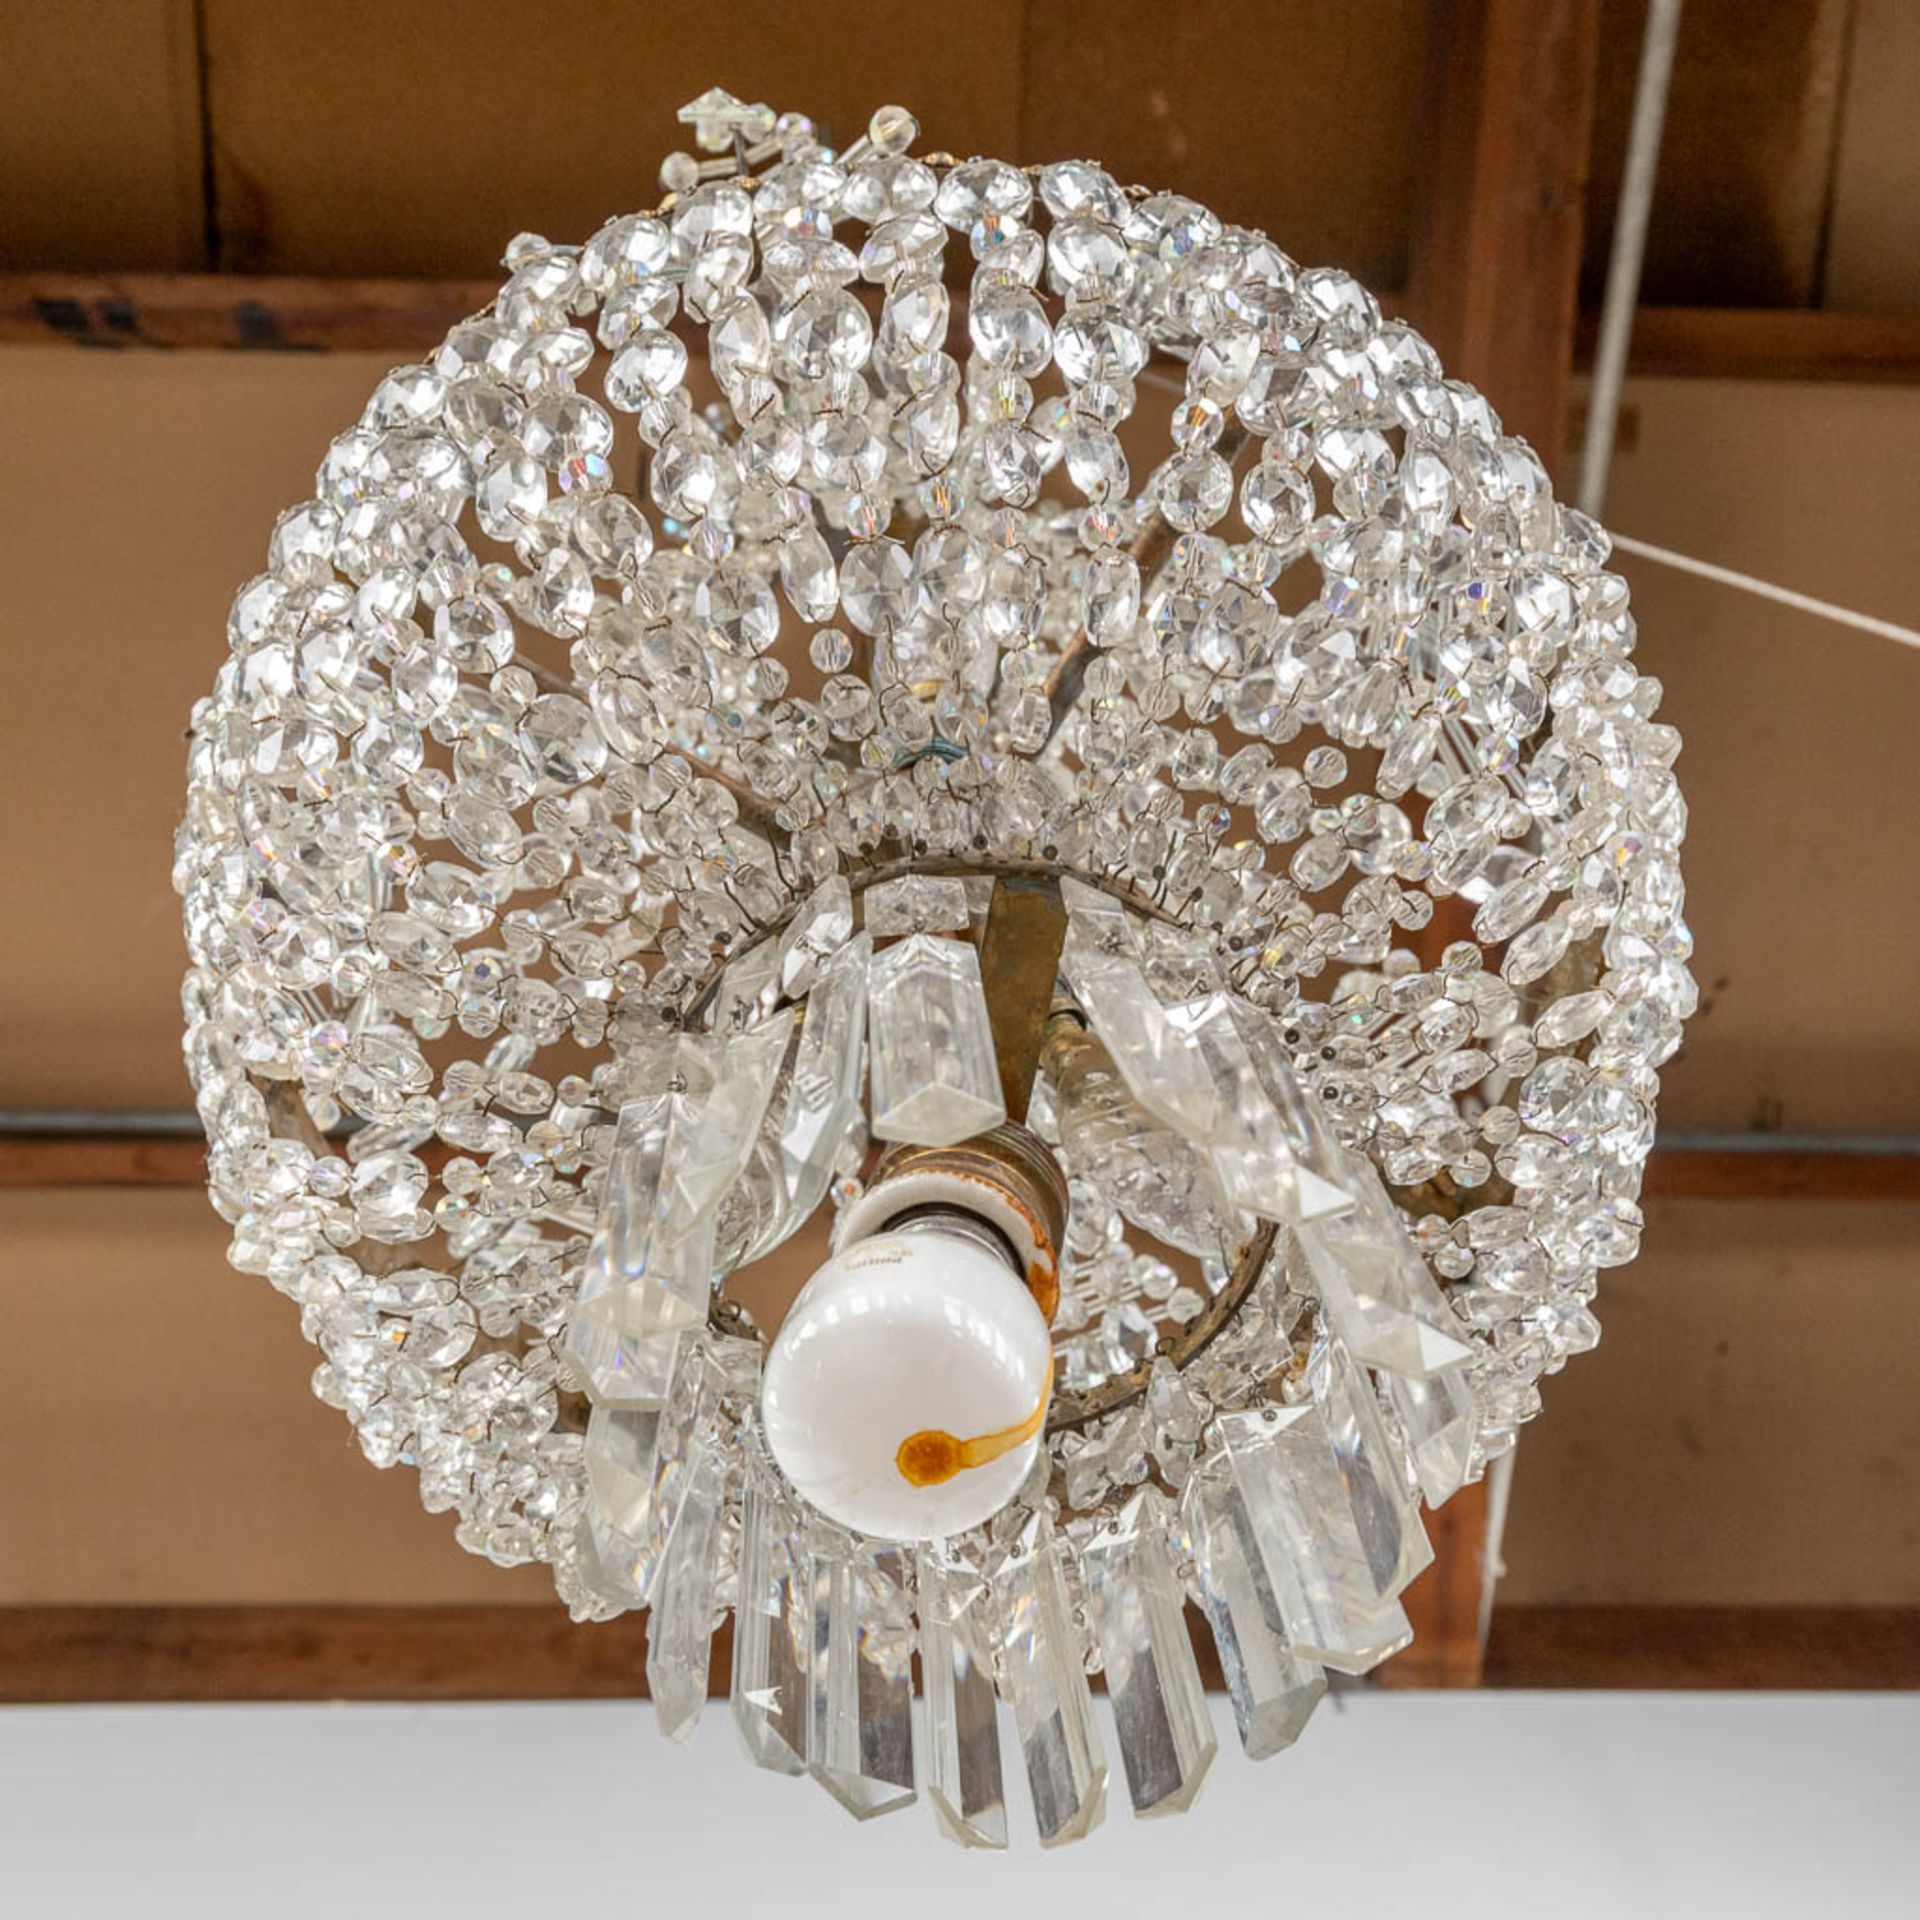 A chandelier 'Sac A Perles' decorated with tiny ram's heads. 20th century. (H: 83 x D: 42 cm) - Image 6 of 10